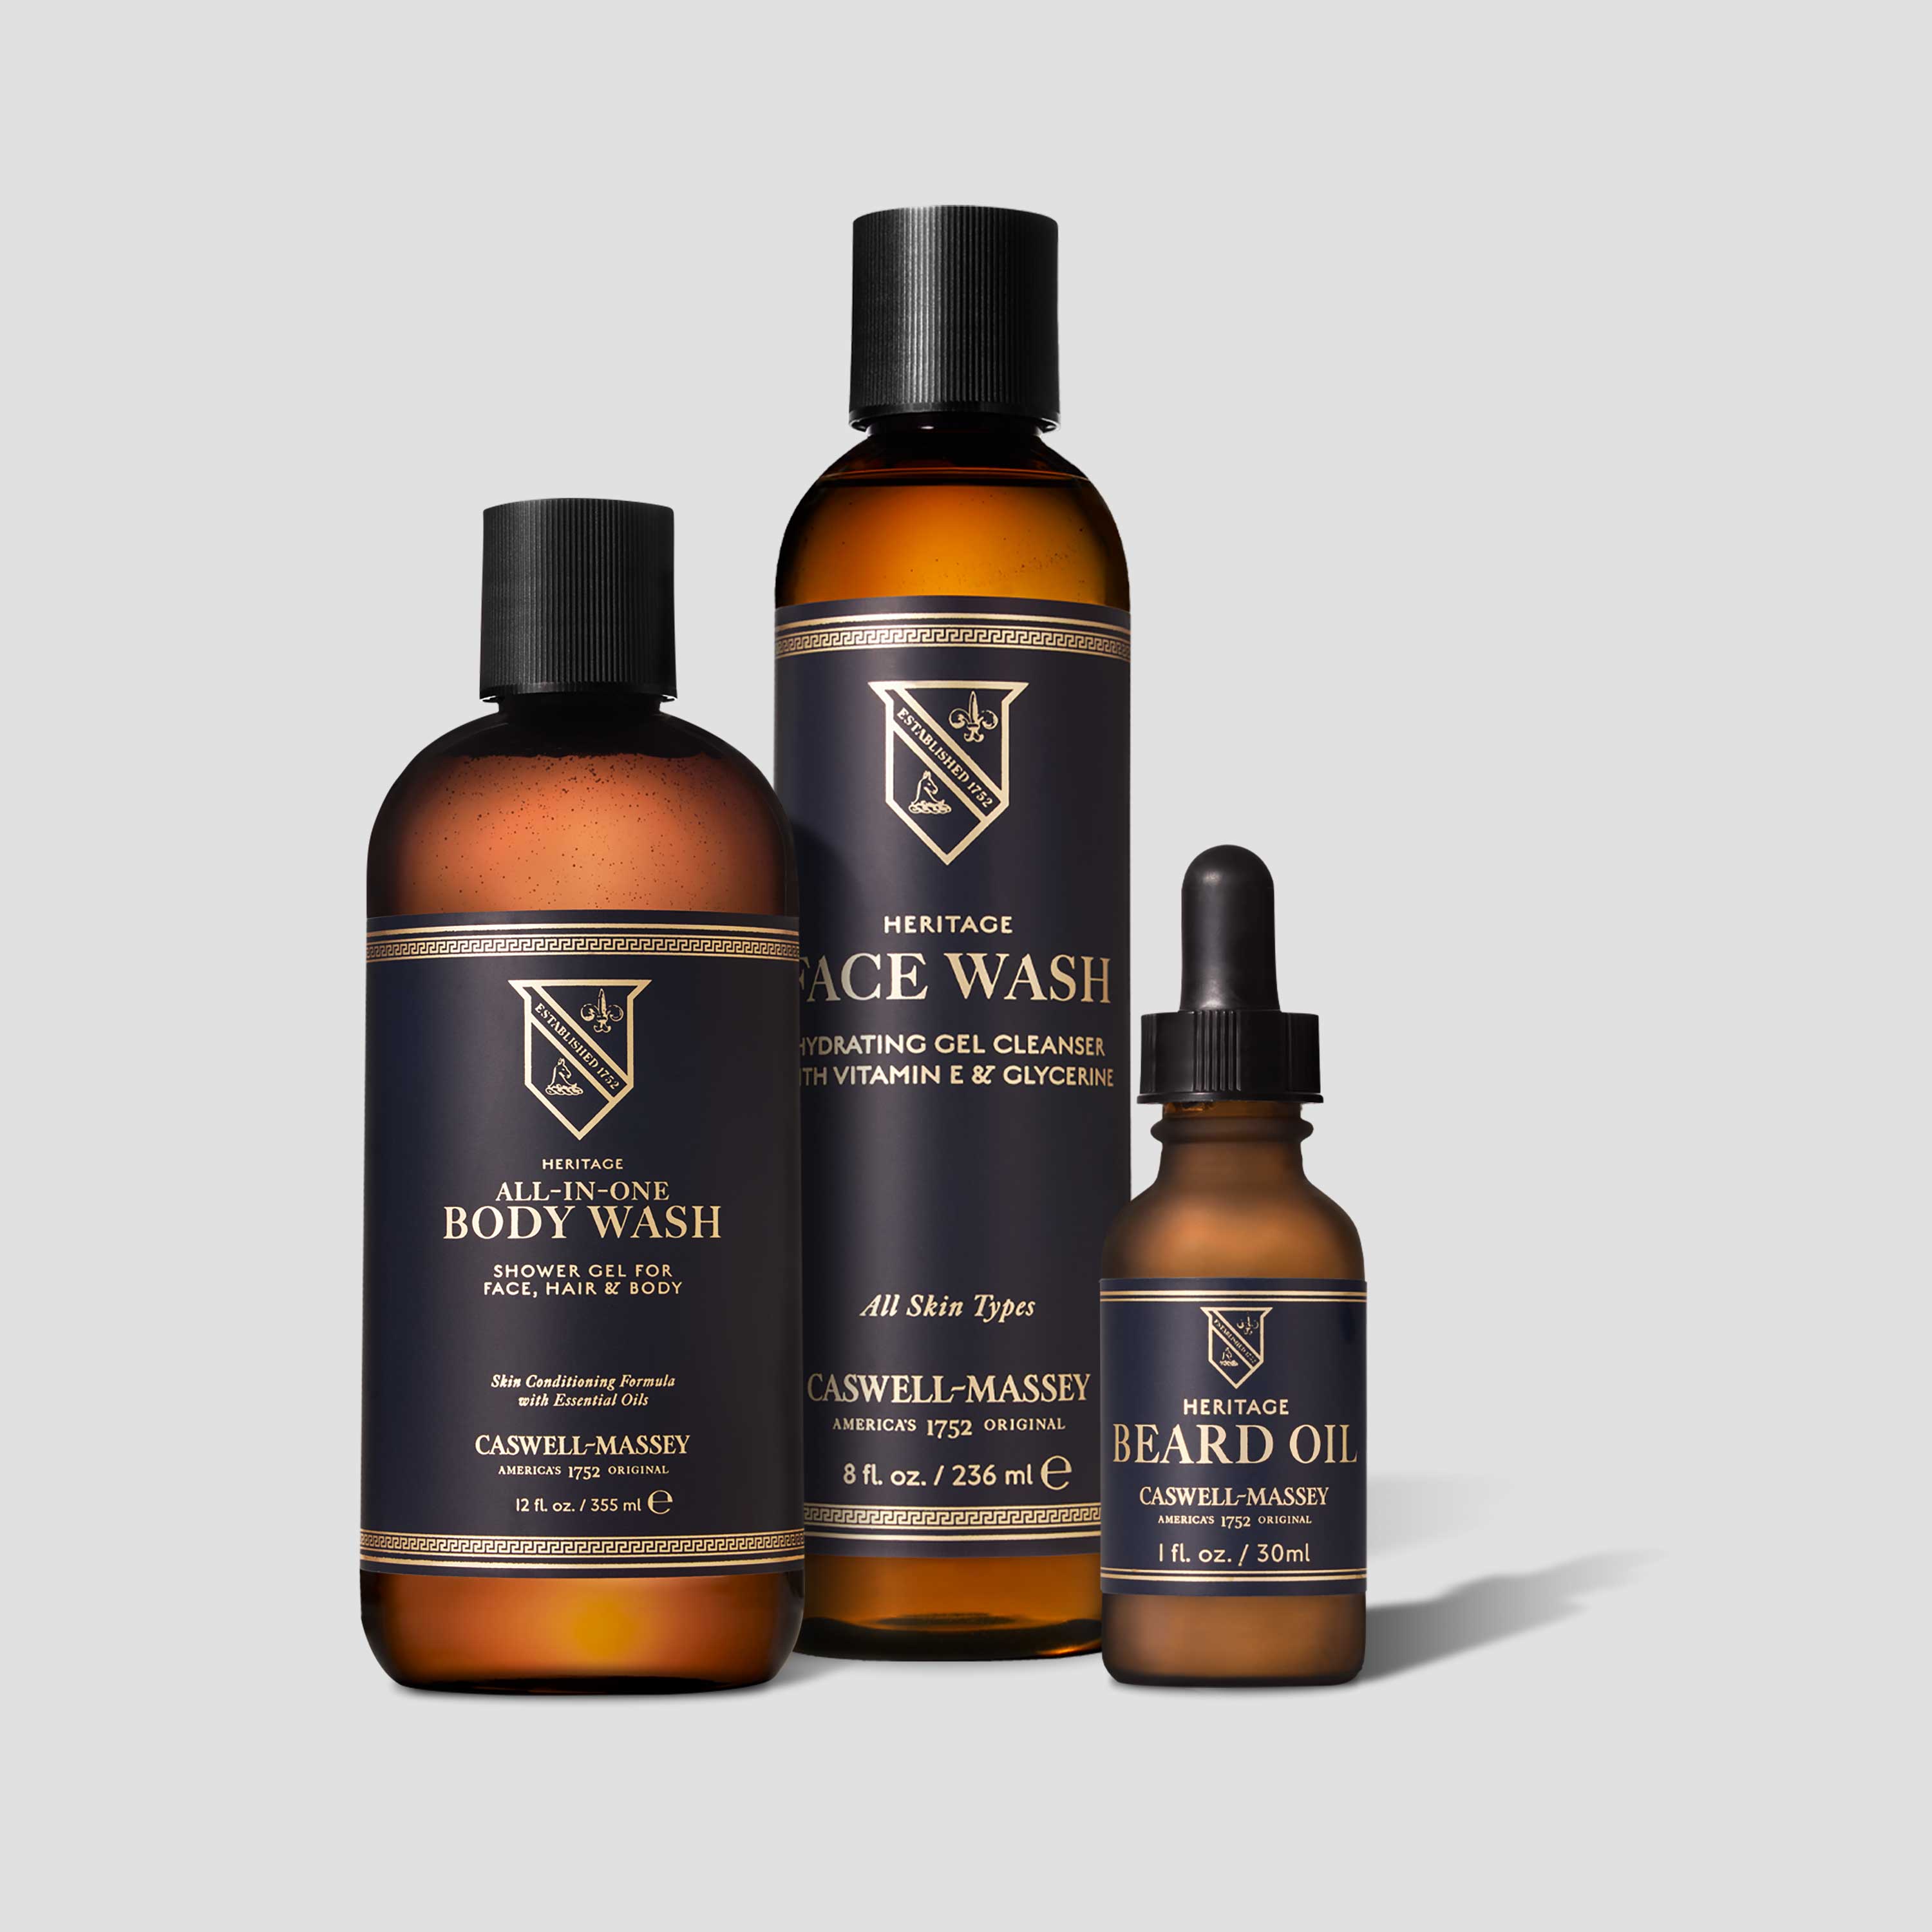 Caswell-Massey Heritage Face Wash, All-in-One Body Wash, and Heritage Beard Oil for men